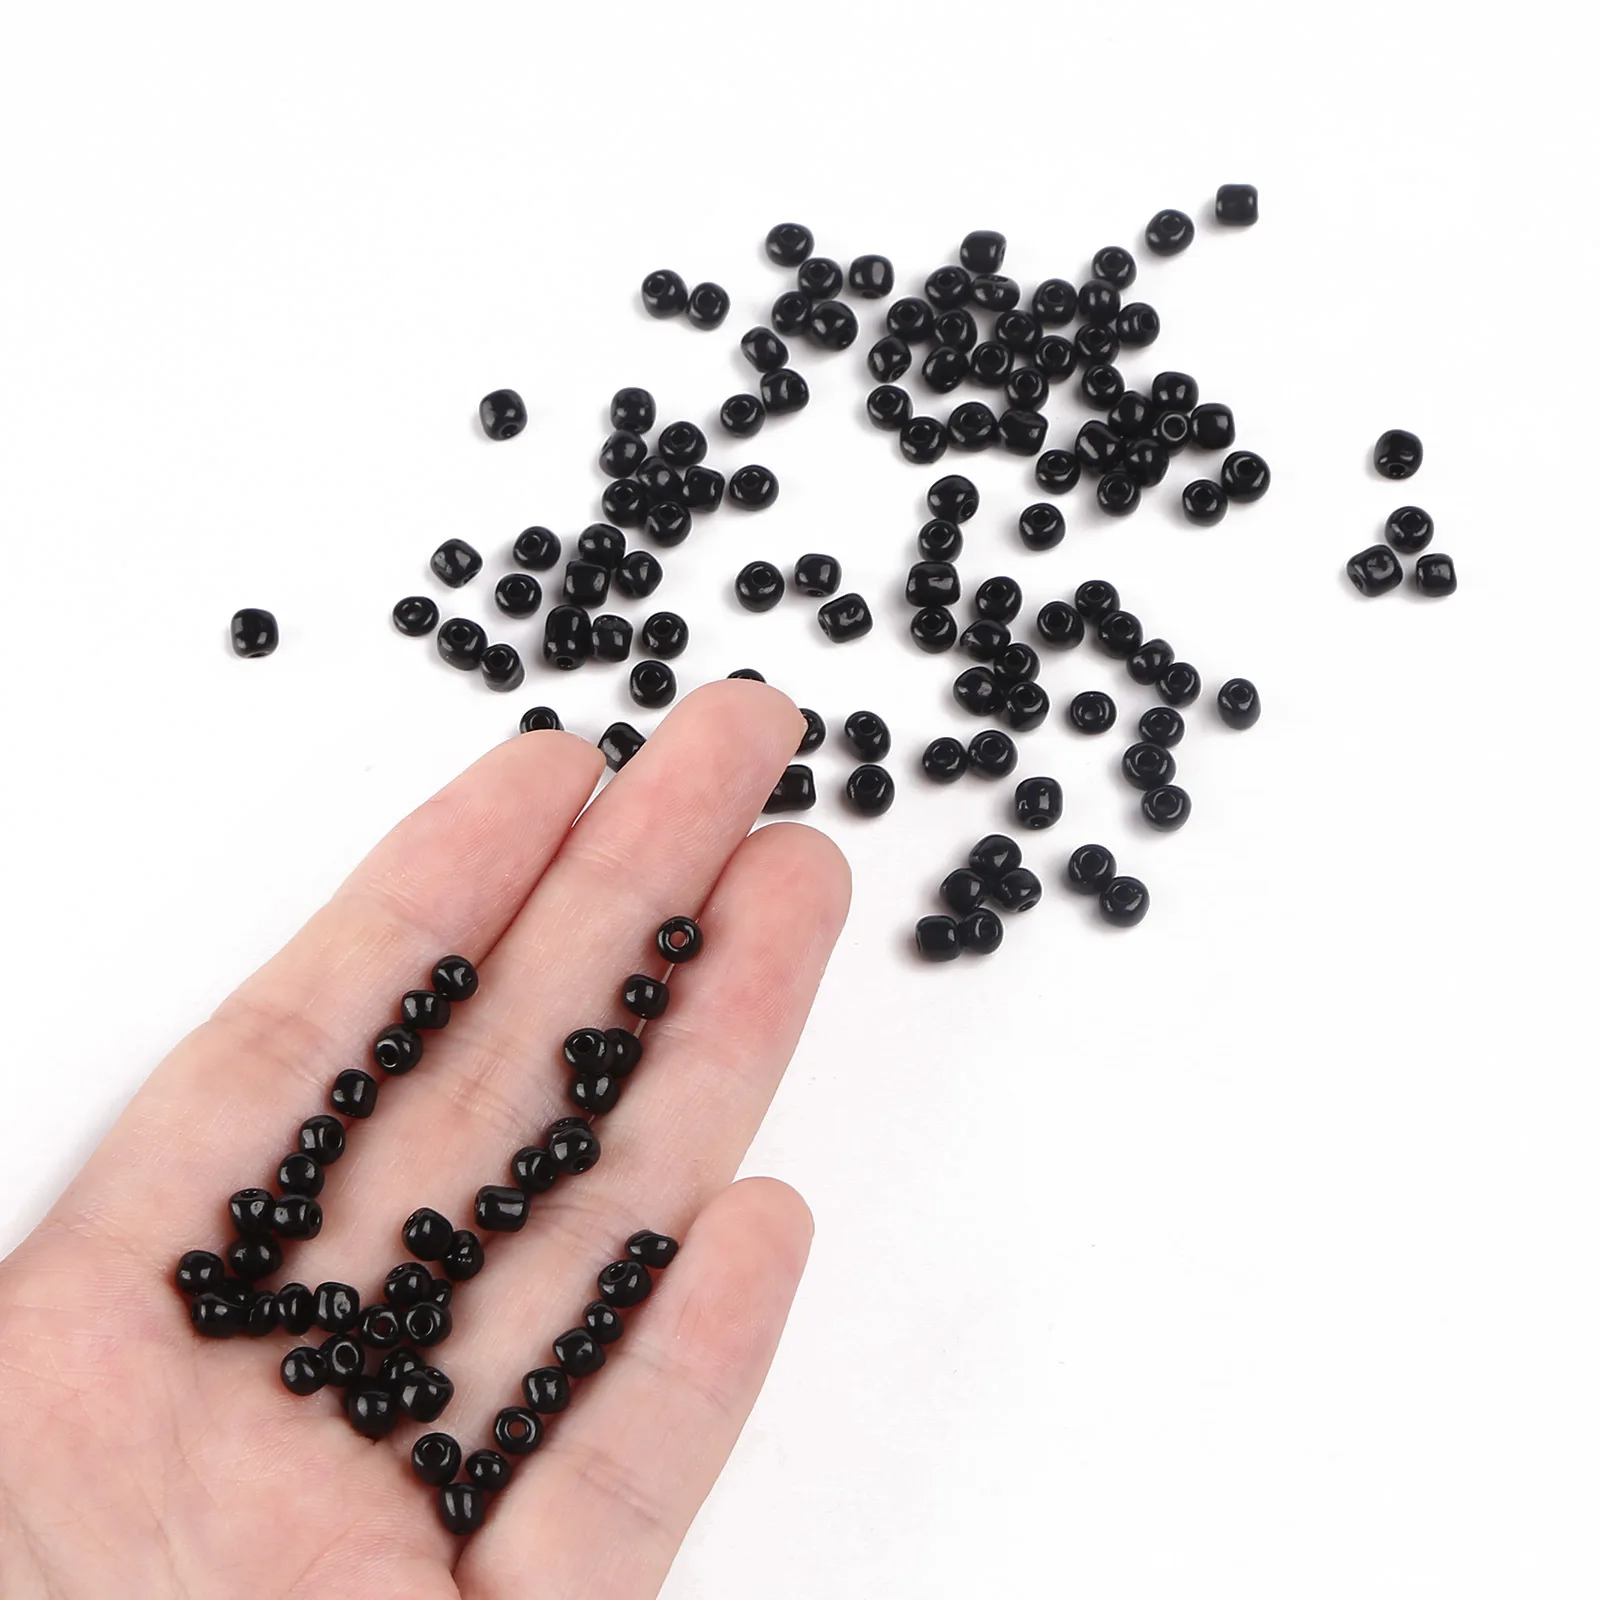 XUQIAN Hot Selling 4500pcs Bracelet Spacer Loose Glass Seed Beads for DIY Necklaces Craft Jewelry Making Supplies B0325